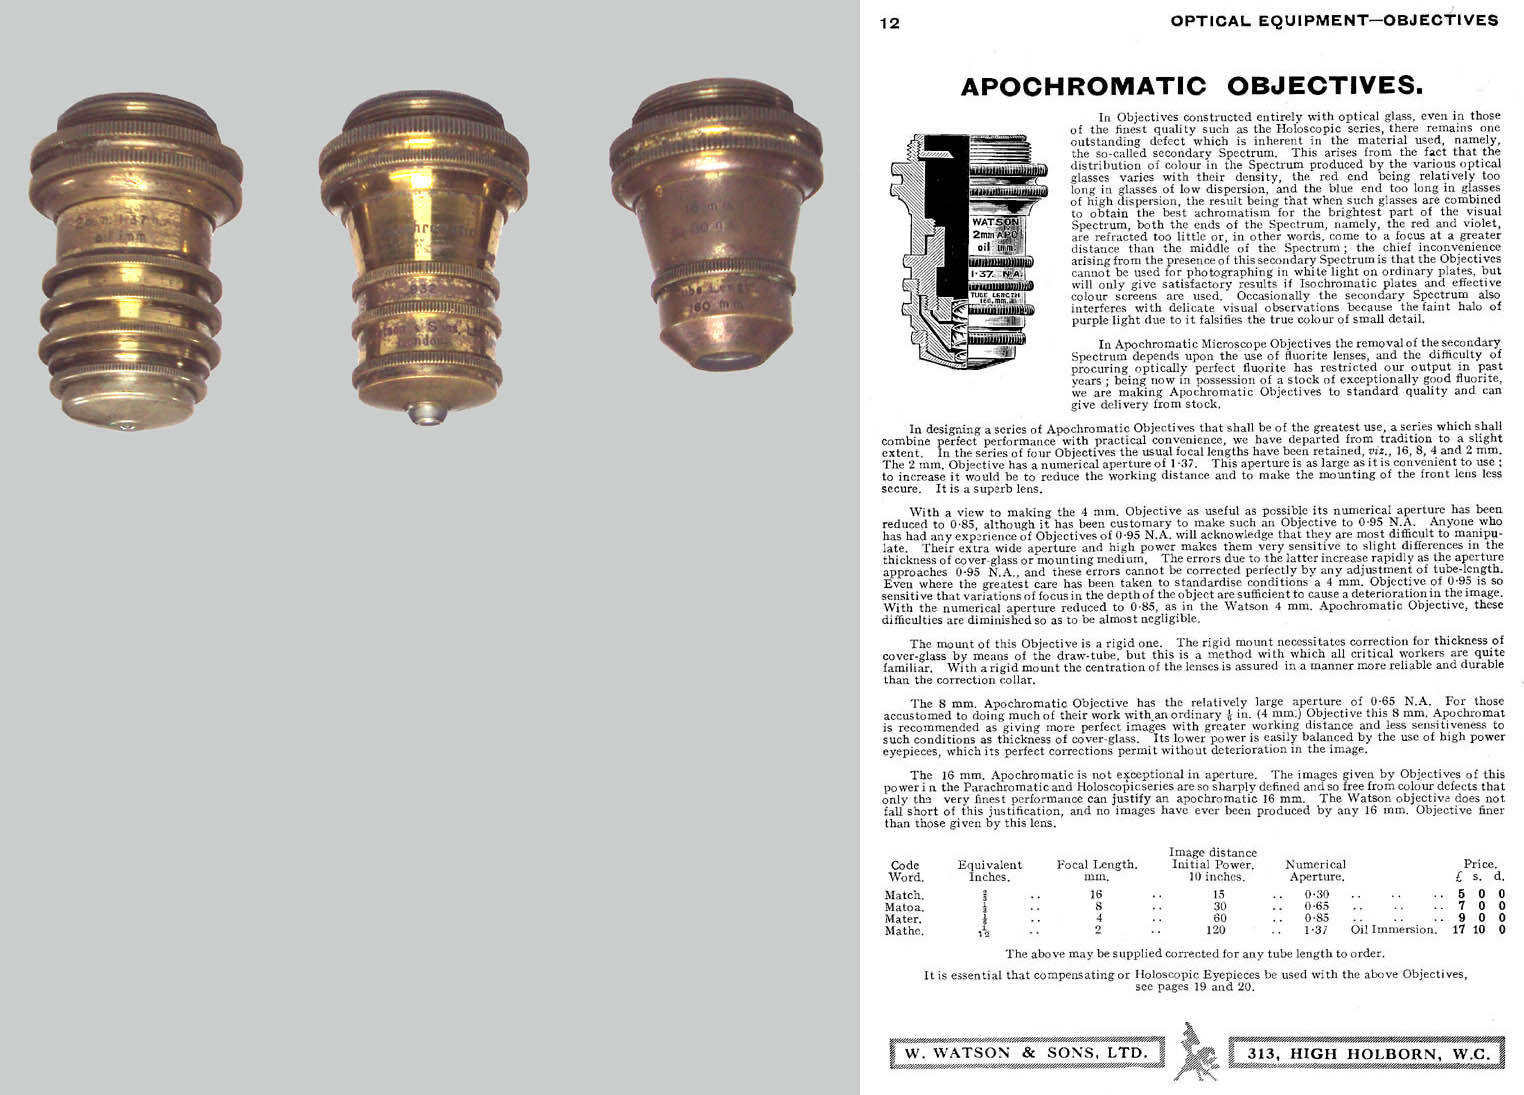 Apochromatic Objectives for Watson & Sons Ltd Royal Microscope